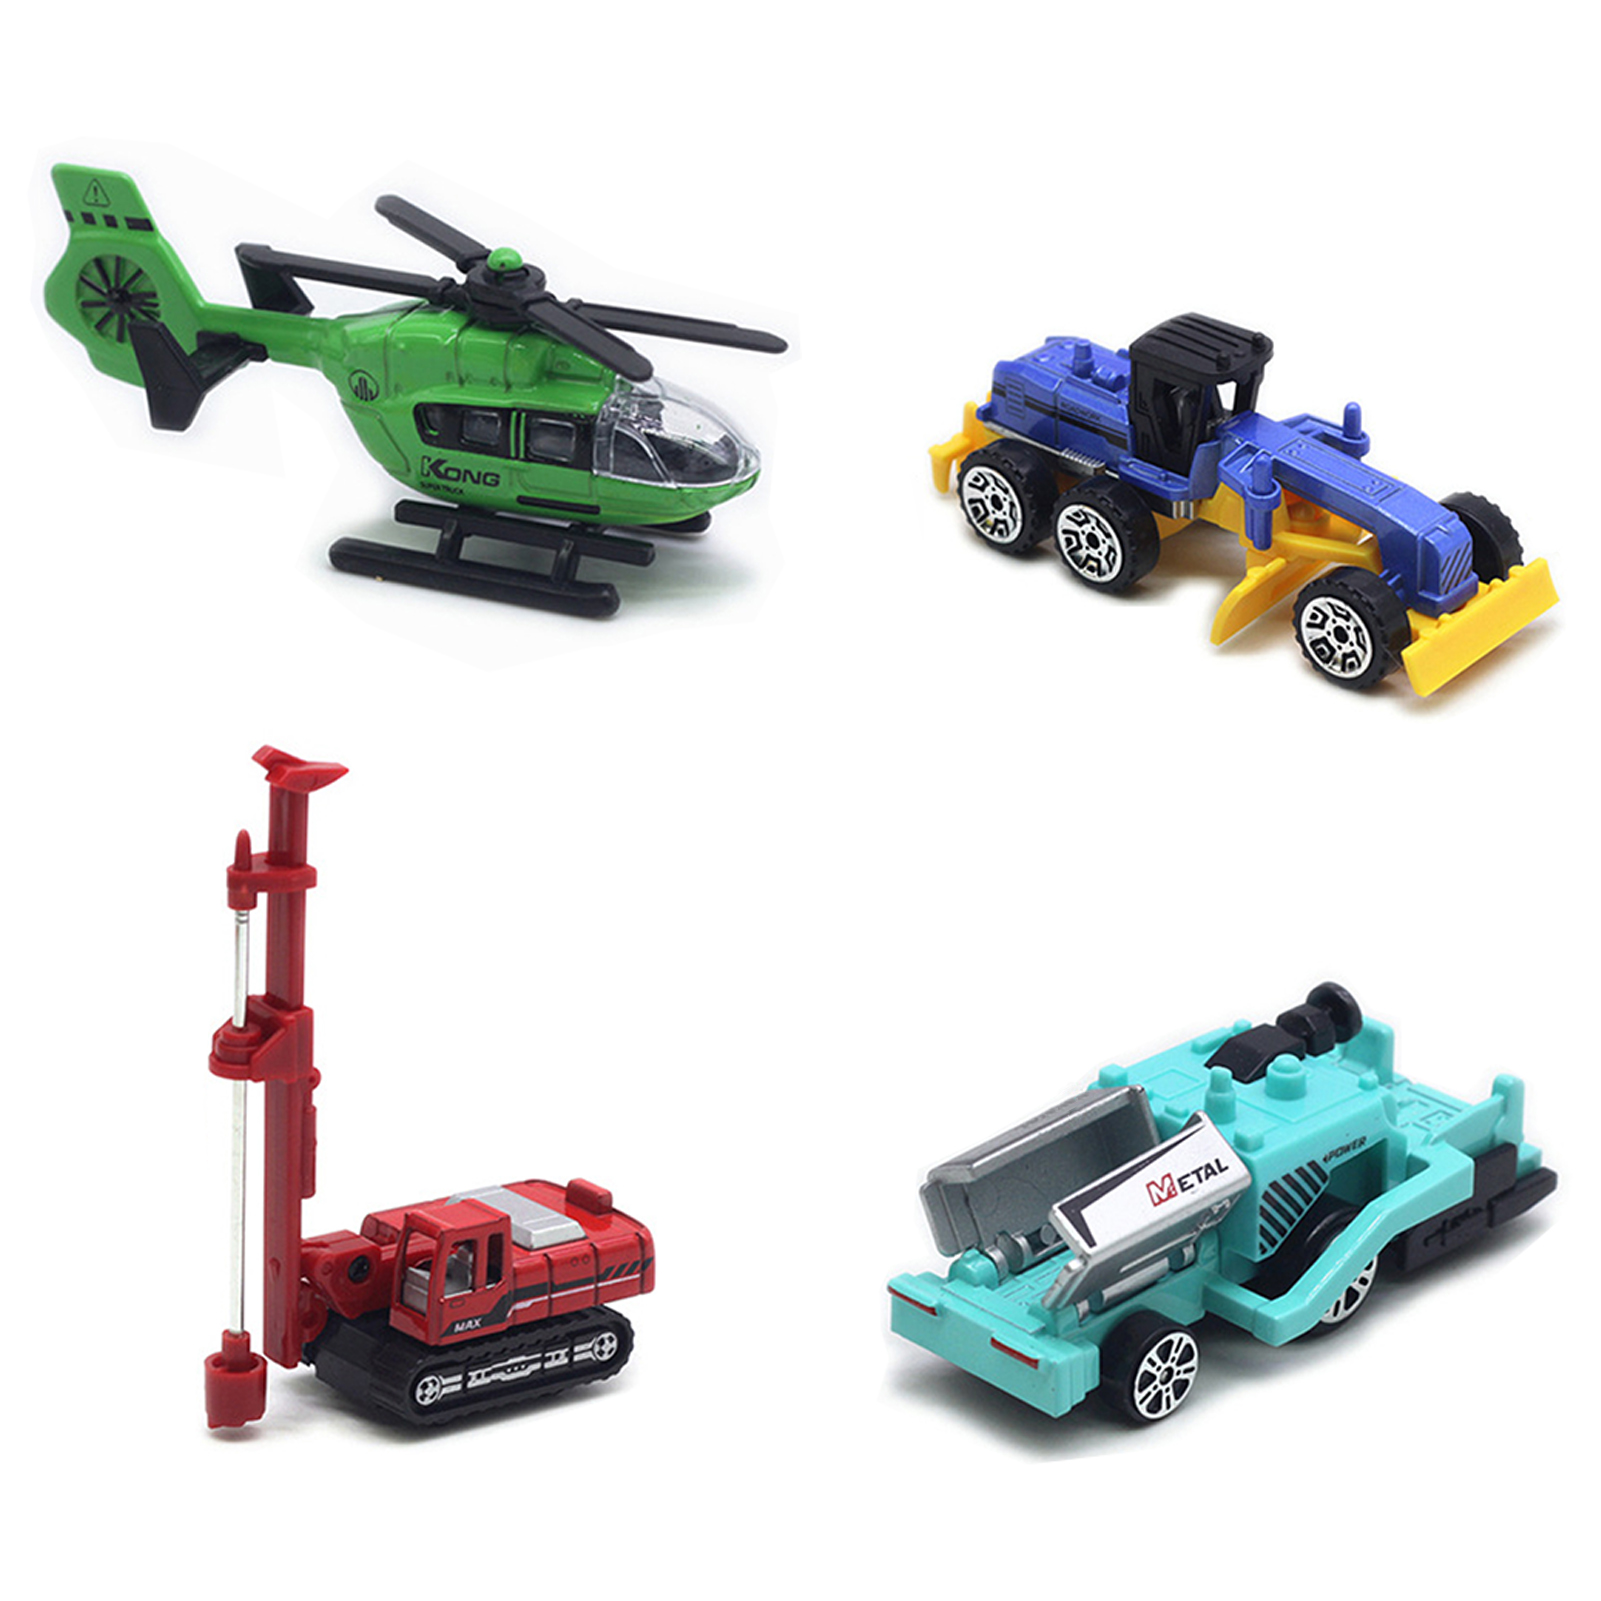 Pnellth 4Pcs/Set Engineering Trunk Toys Simulation Cranes Forklift Cargo Truck Diecast Alloy Vehicle Toy 1:64 Scale Engineering Vehicle Aircraft Motorcycle Models Set Christmas Gift - image 5 of 8